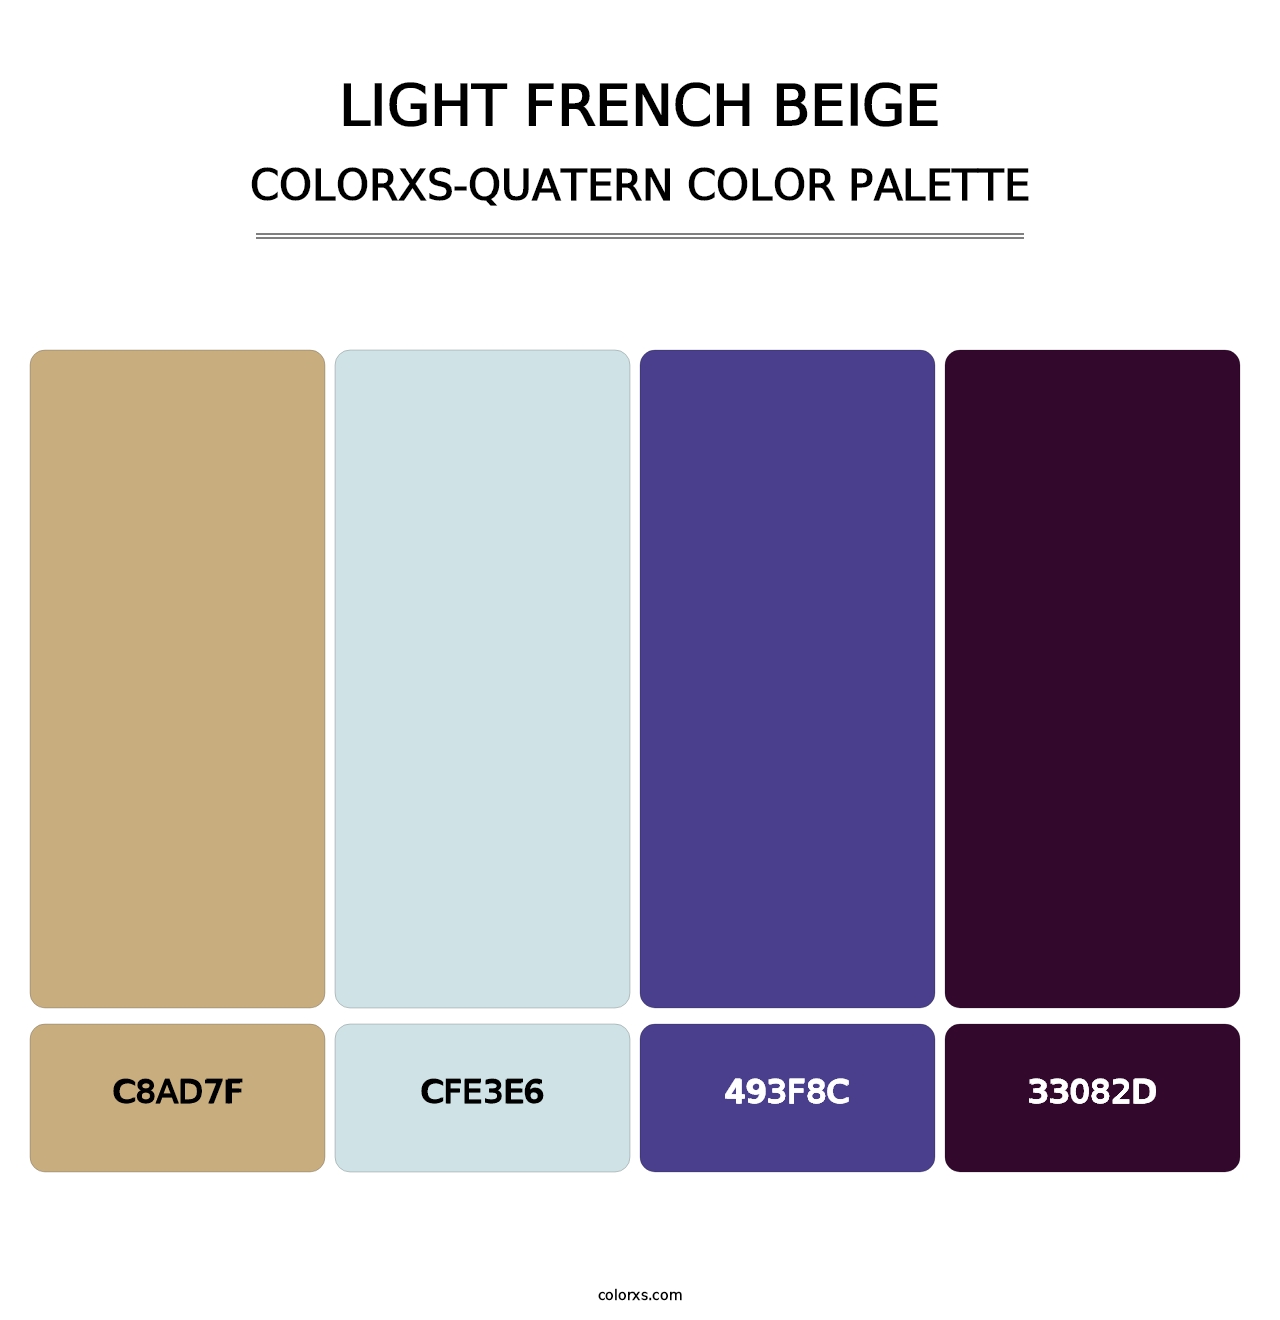 Light French Beige - Colorxs Quatern Palette